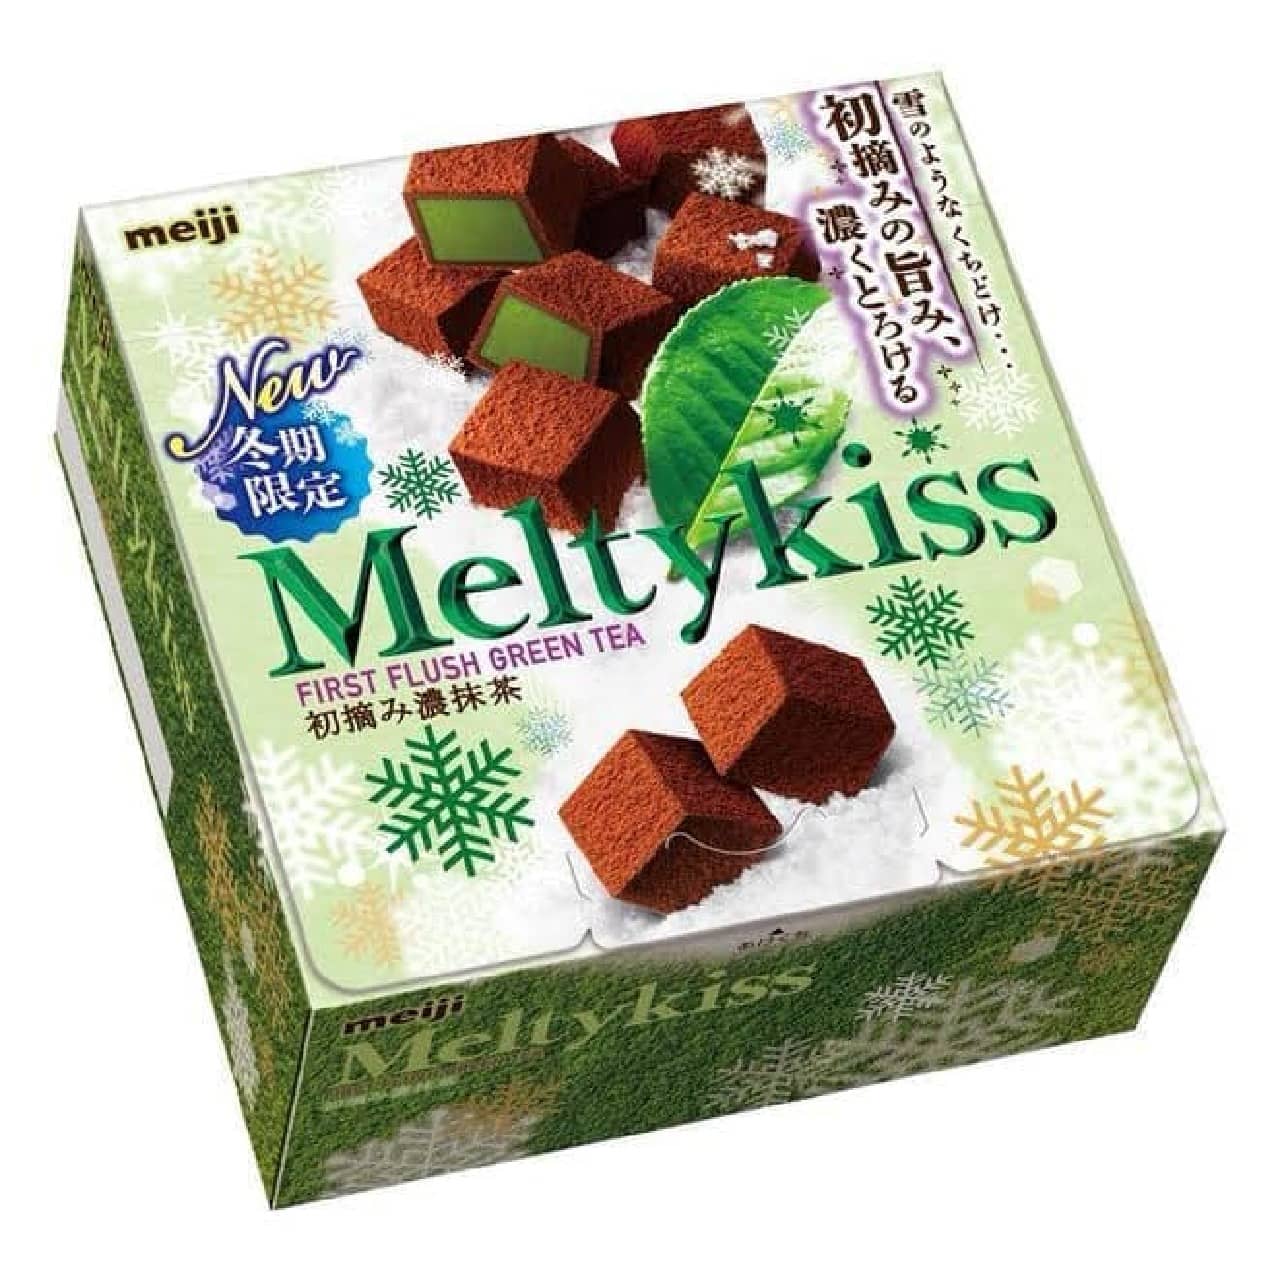 Melty Kiss will be on sale again this year!